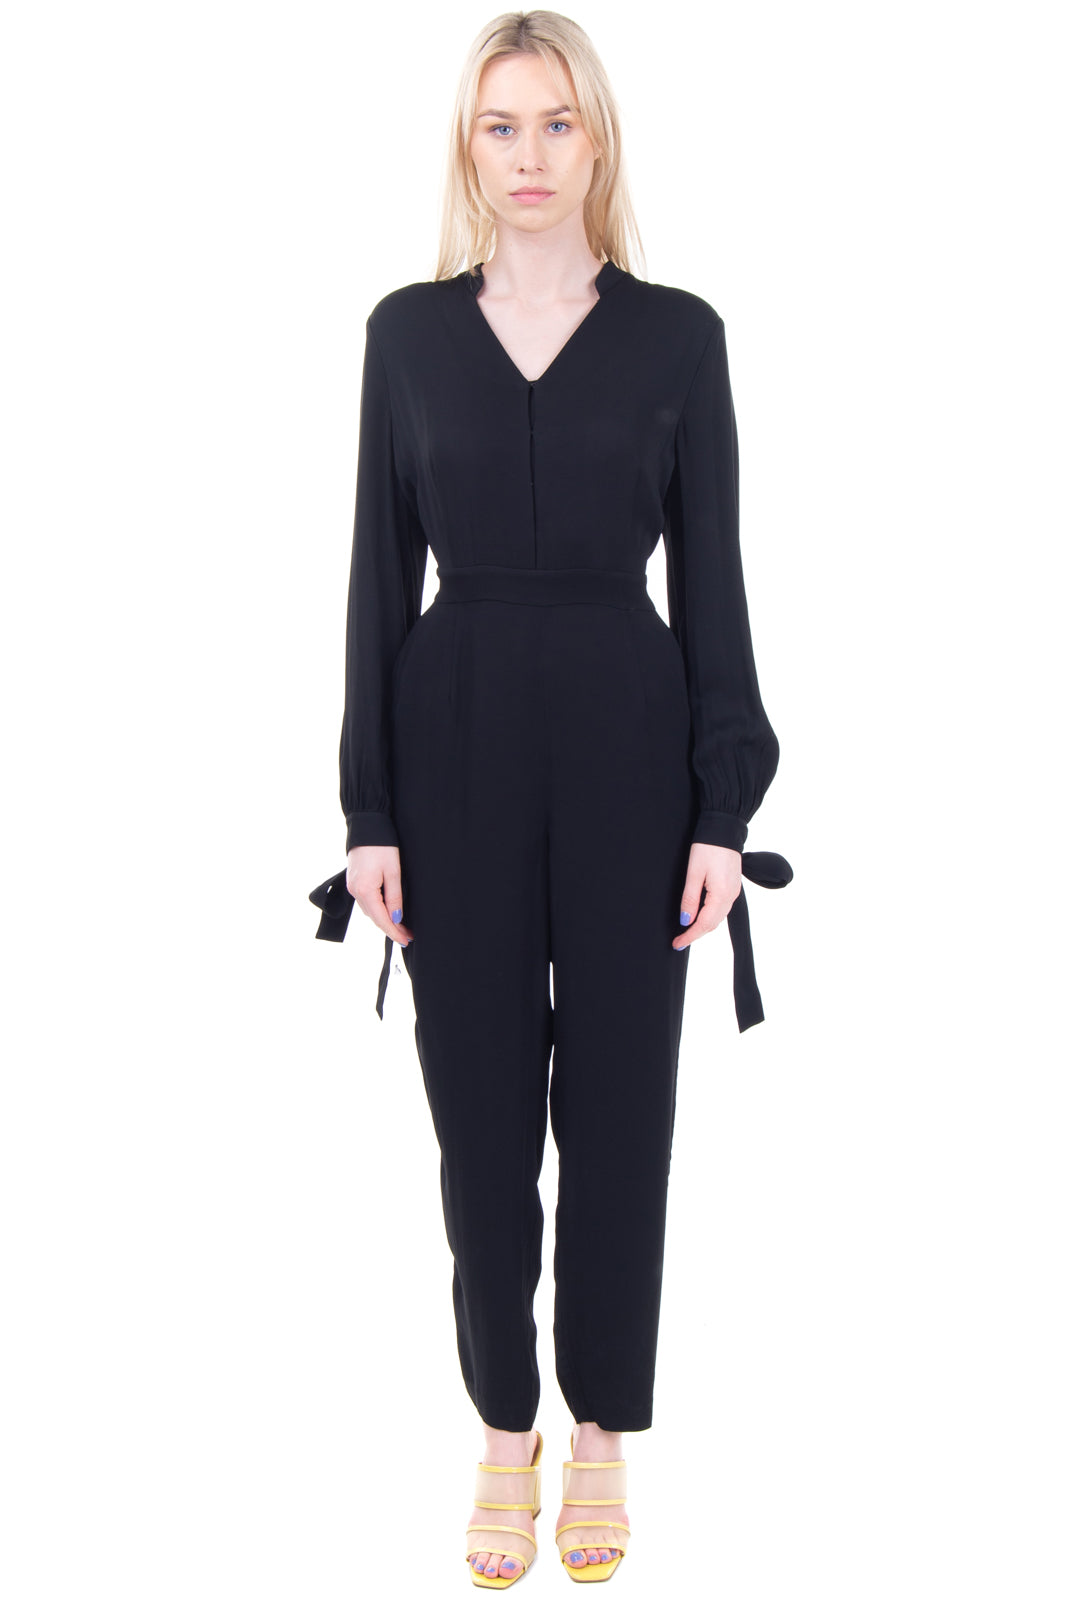 8 Jumpsuit Size 44 Black Tie Bows Long Sleeve V-Neck gallery main photo